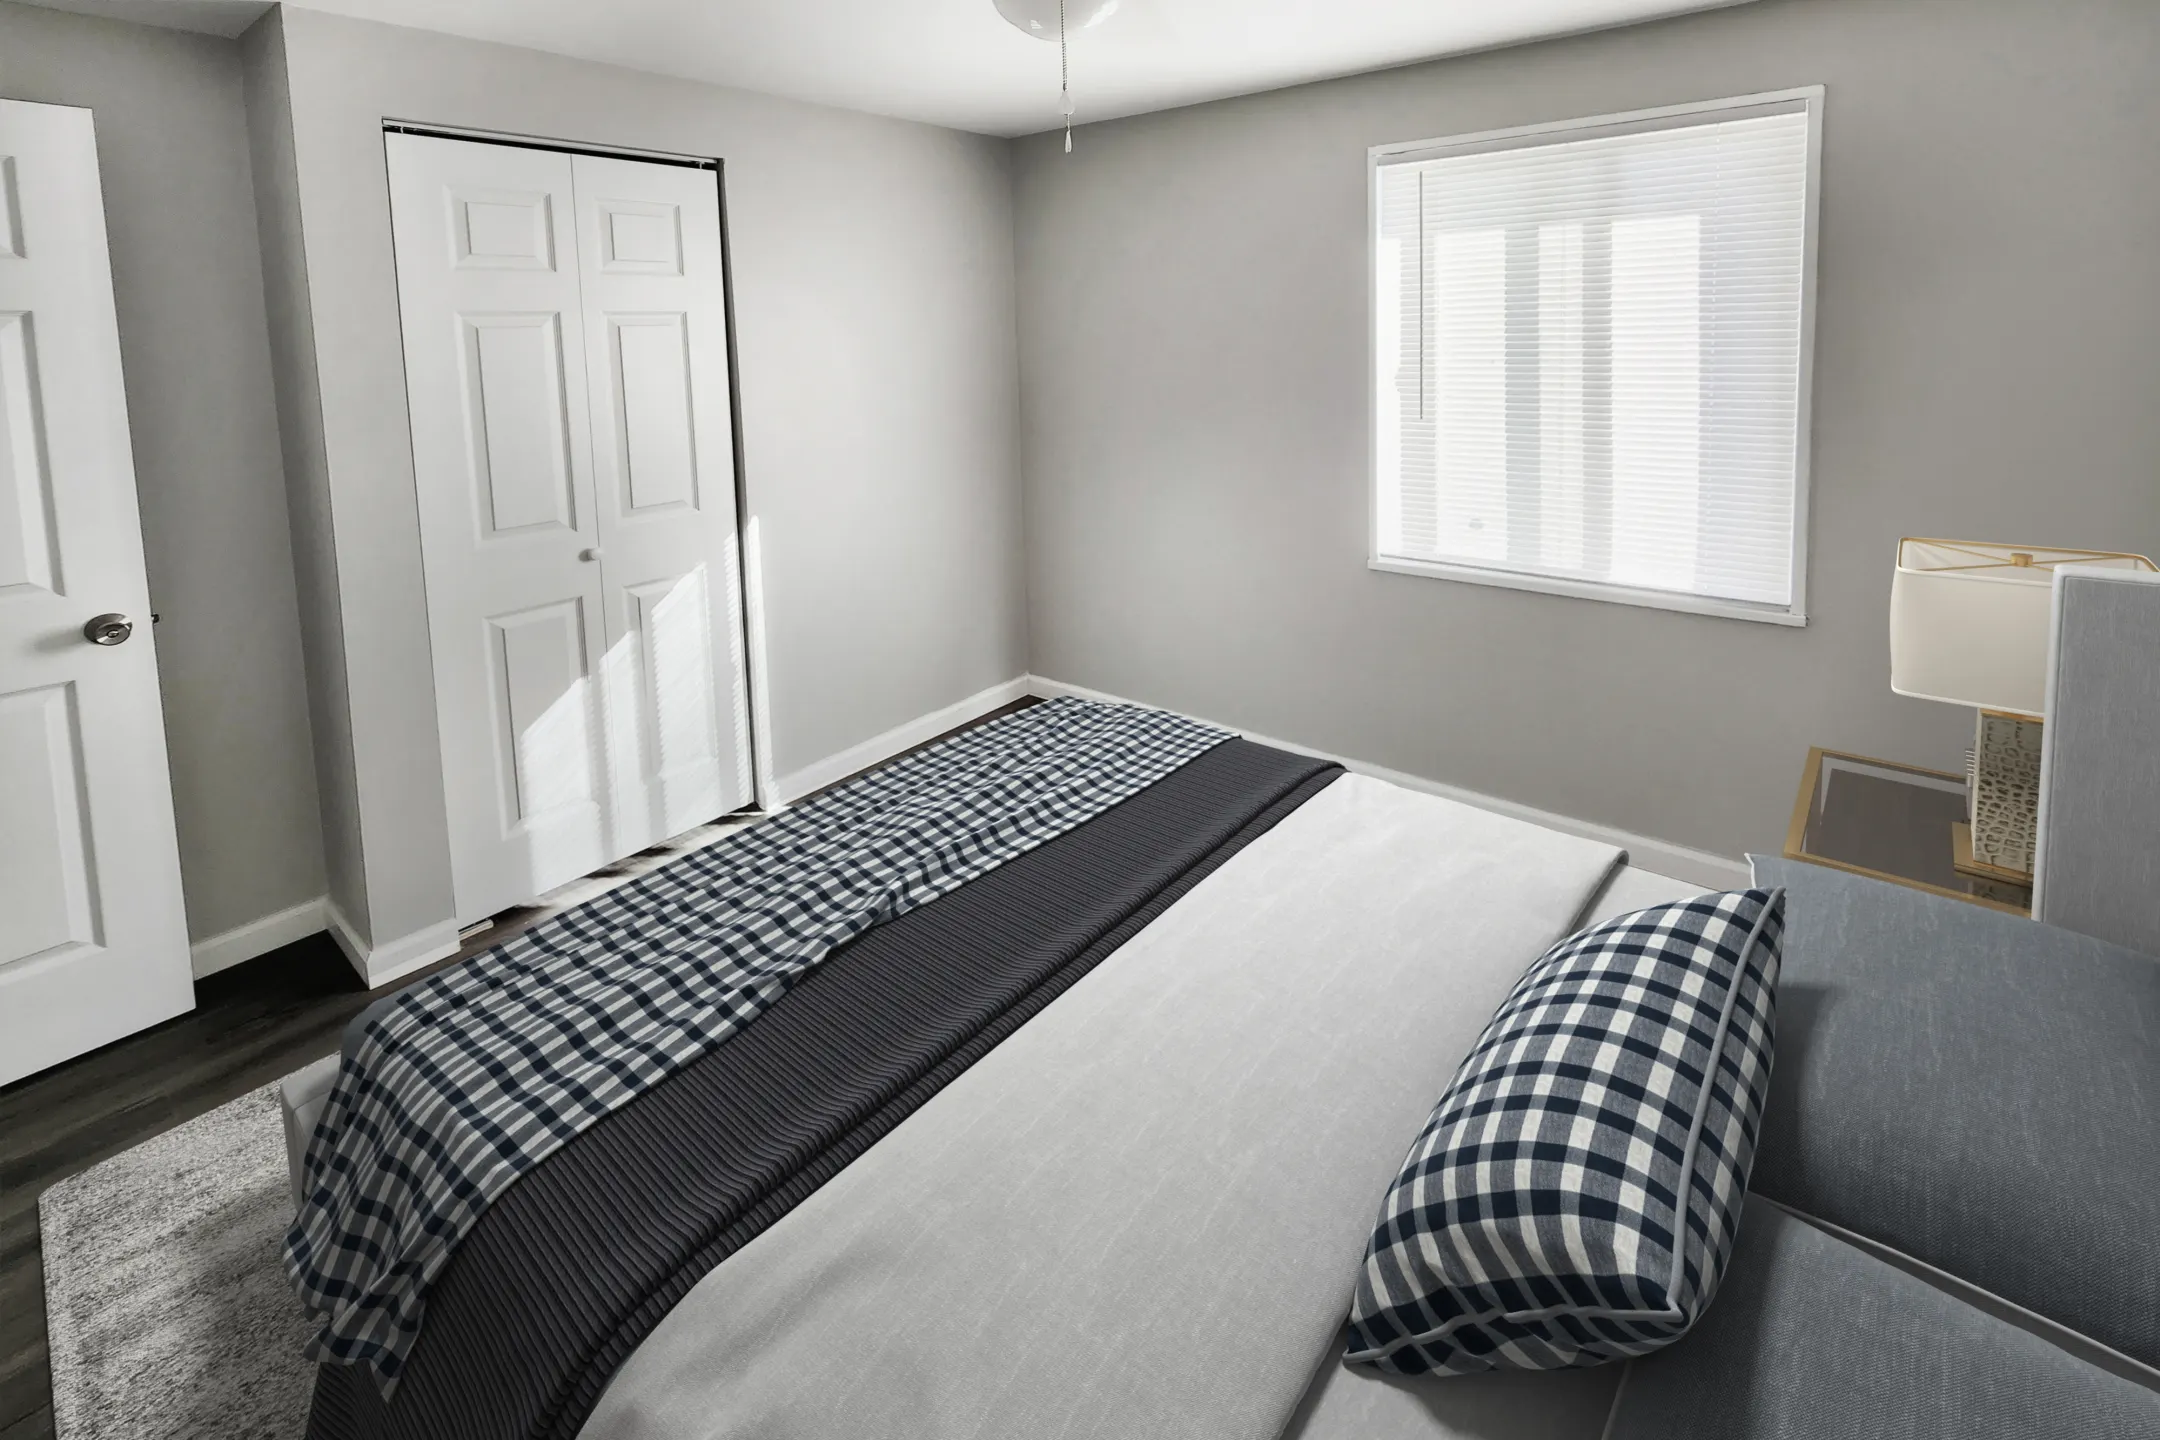 Bedroom - Seneca Oaks Apartments - Youngstown, OH